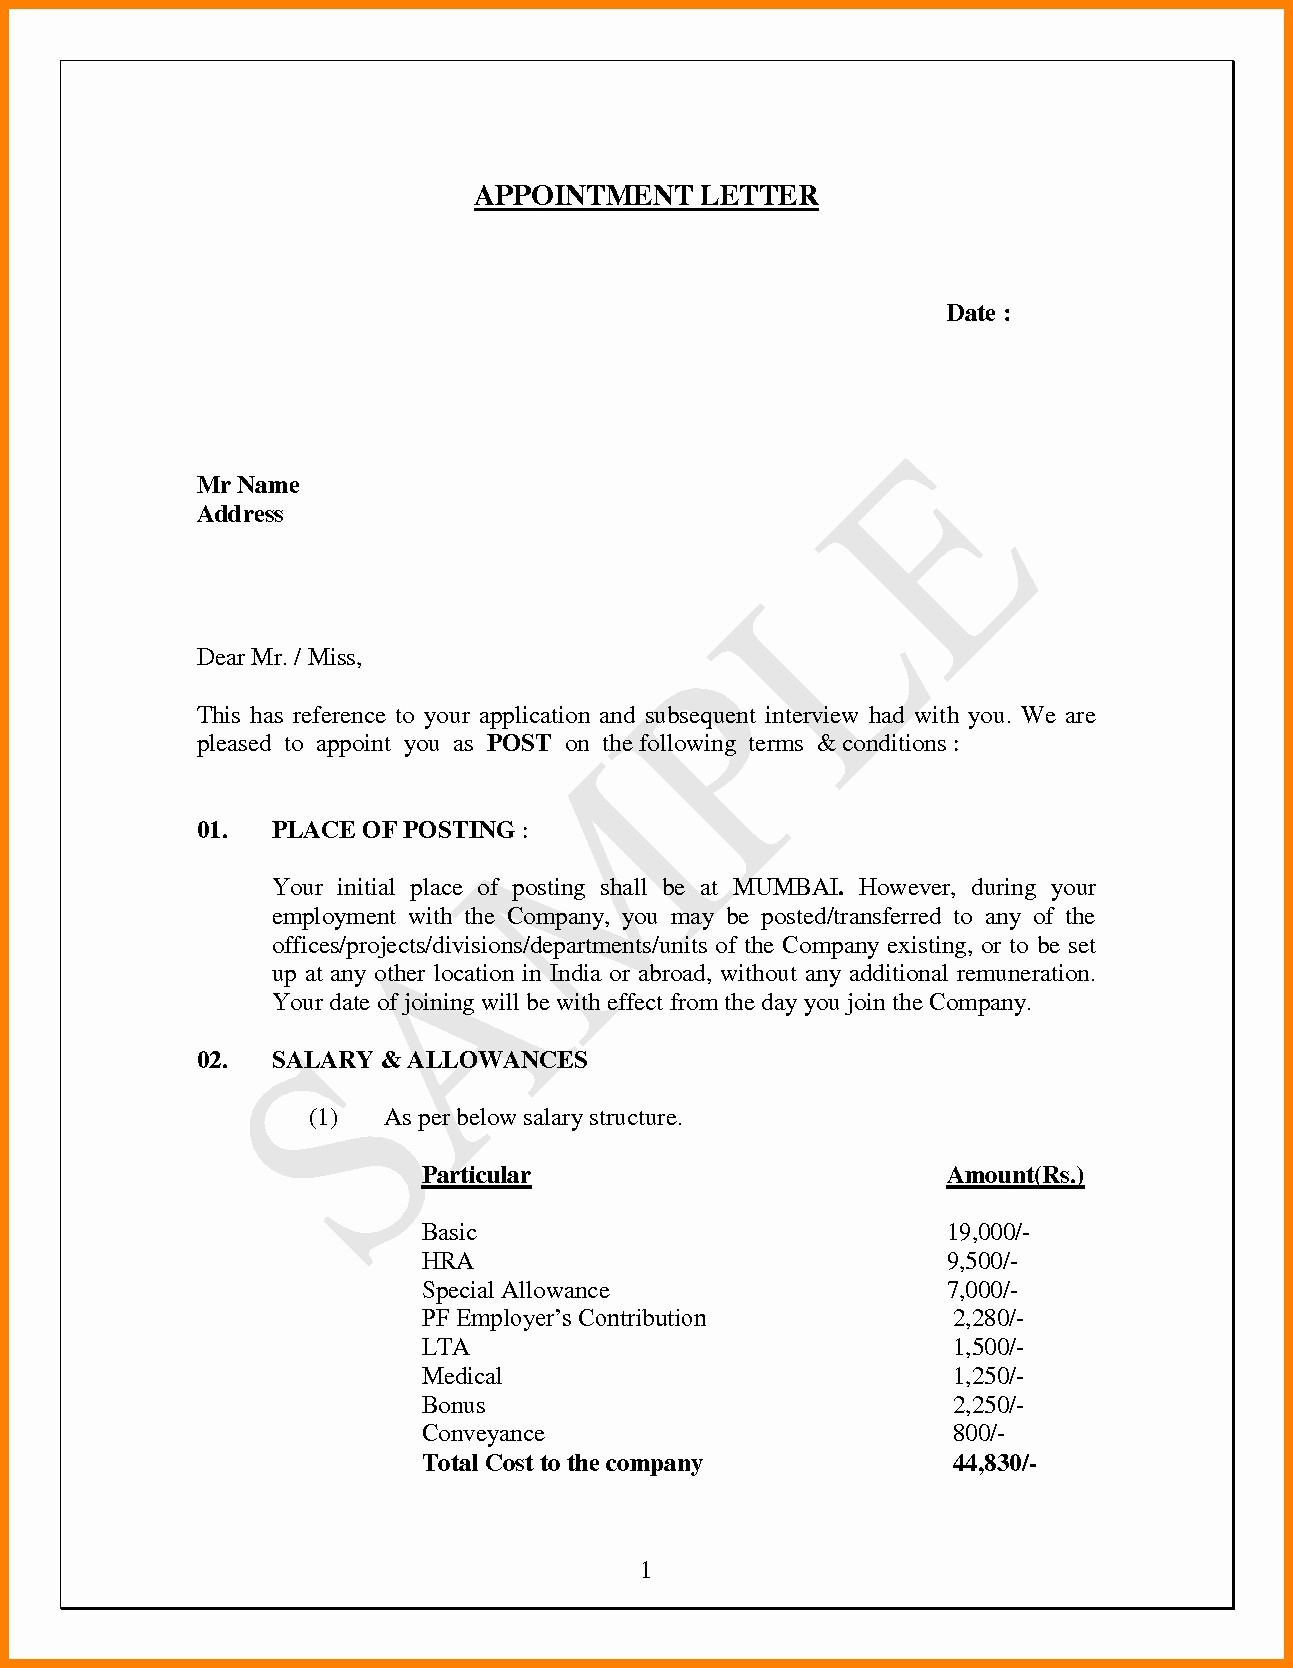 Job Offer Letter Template Pdf - Appointment Letter Sample In Word format India Copy Appointment